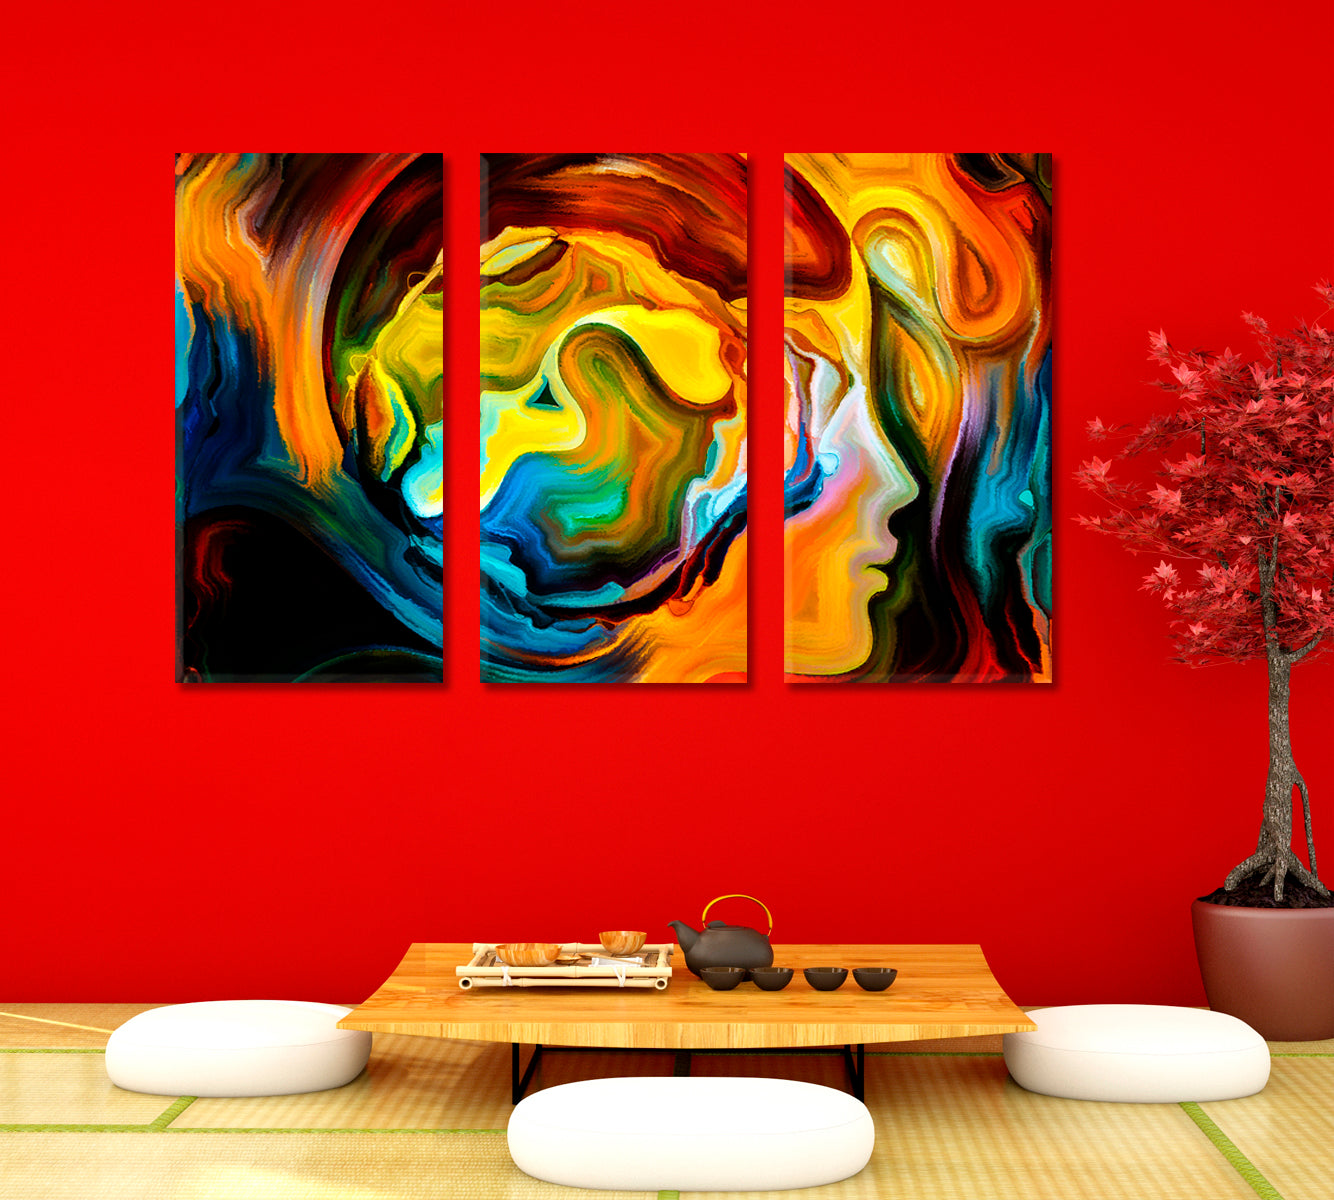 Forces of Nature Expressionism Consciousness Art Artesty 3 panels 36" x 24" 